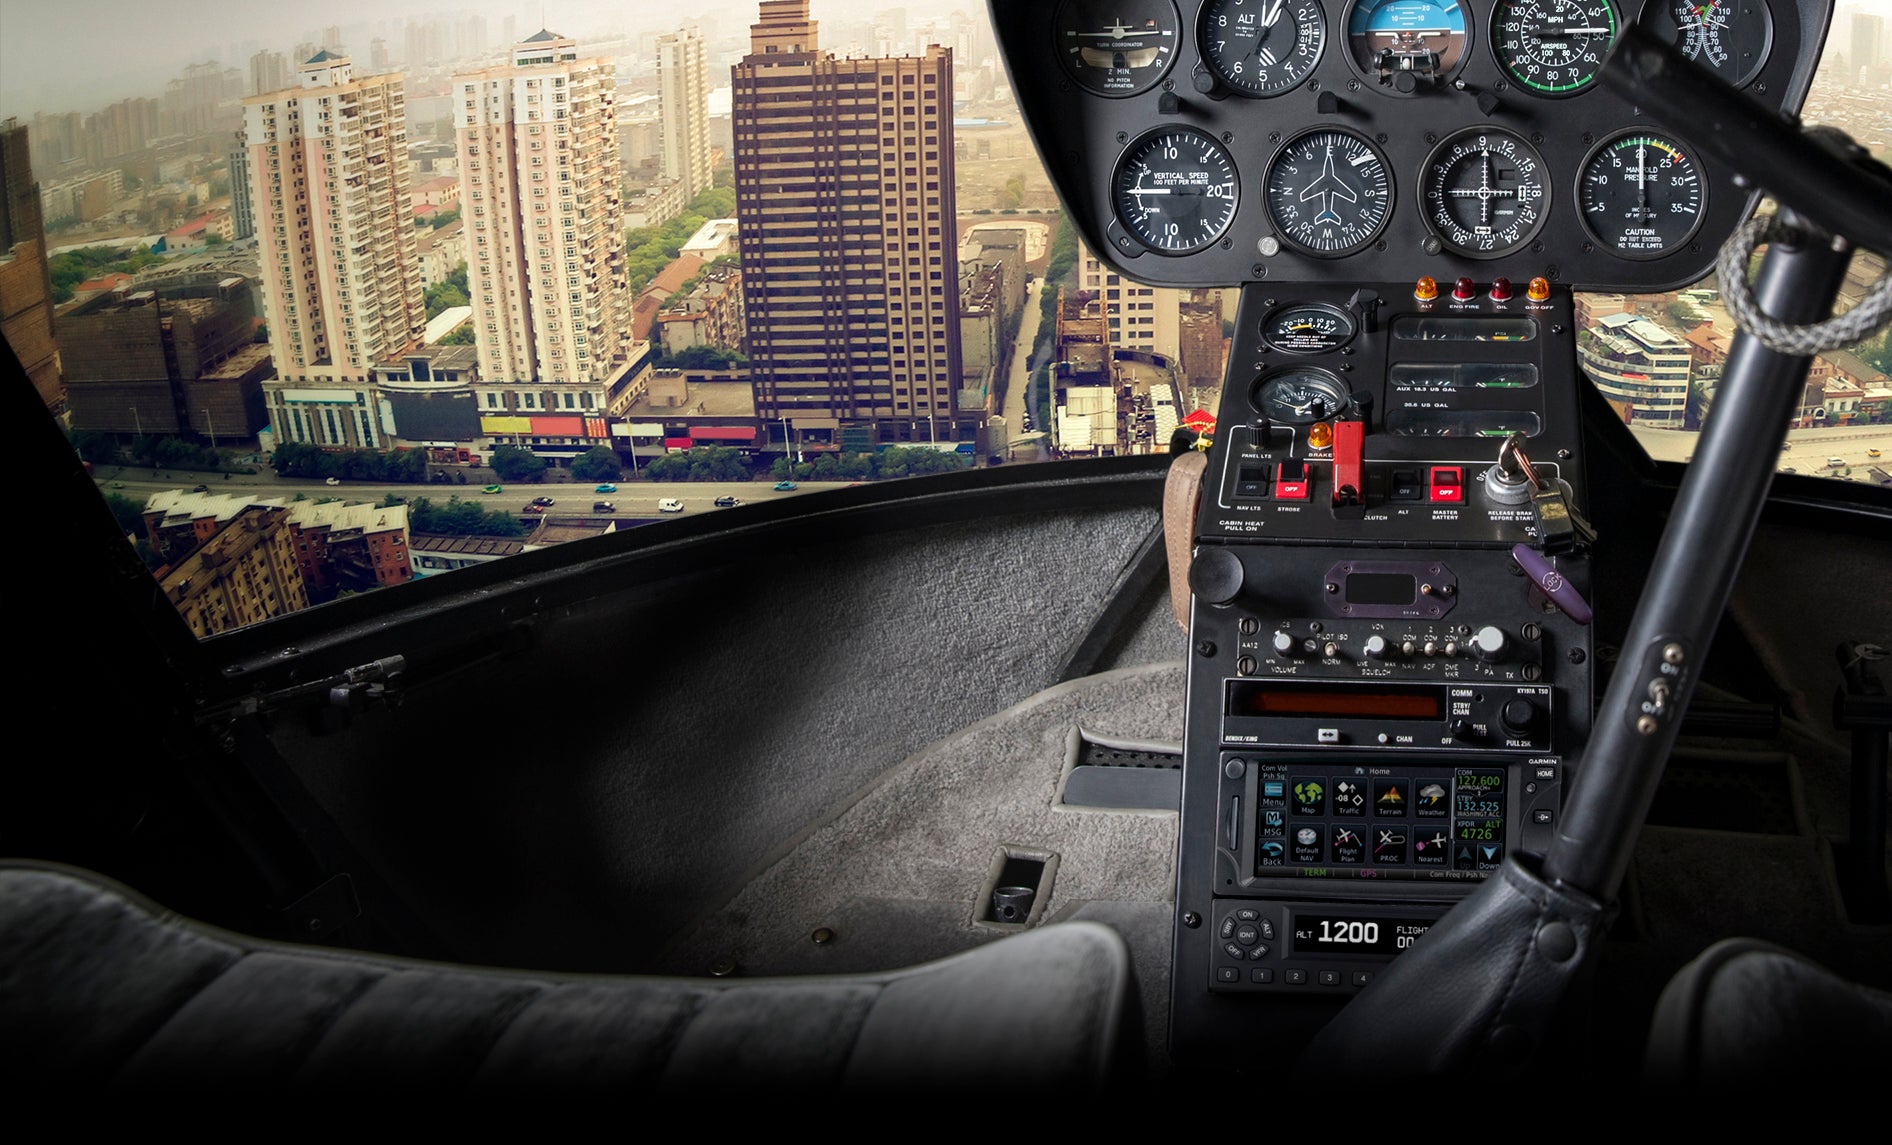 Garmin’s All-in-One ADS-B Transponder Approved for Helicopters